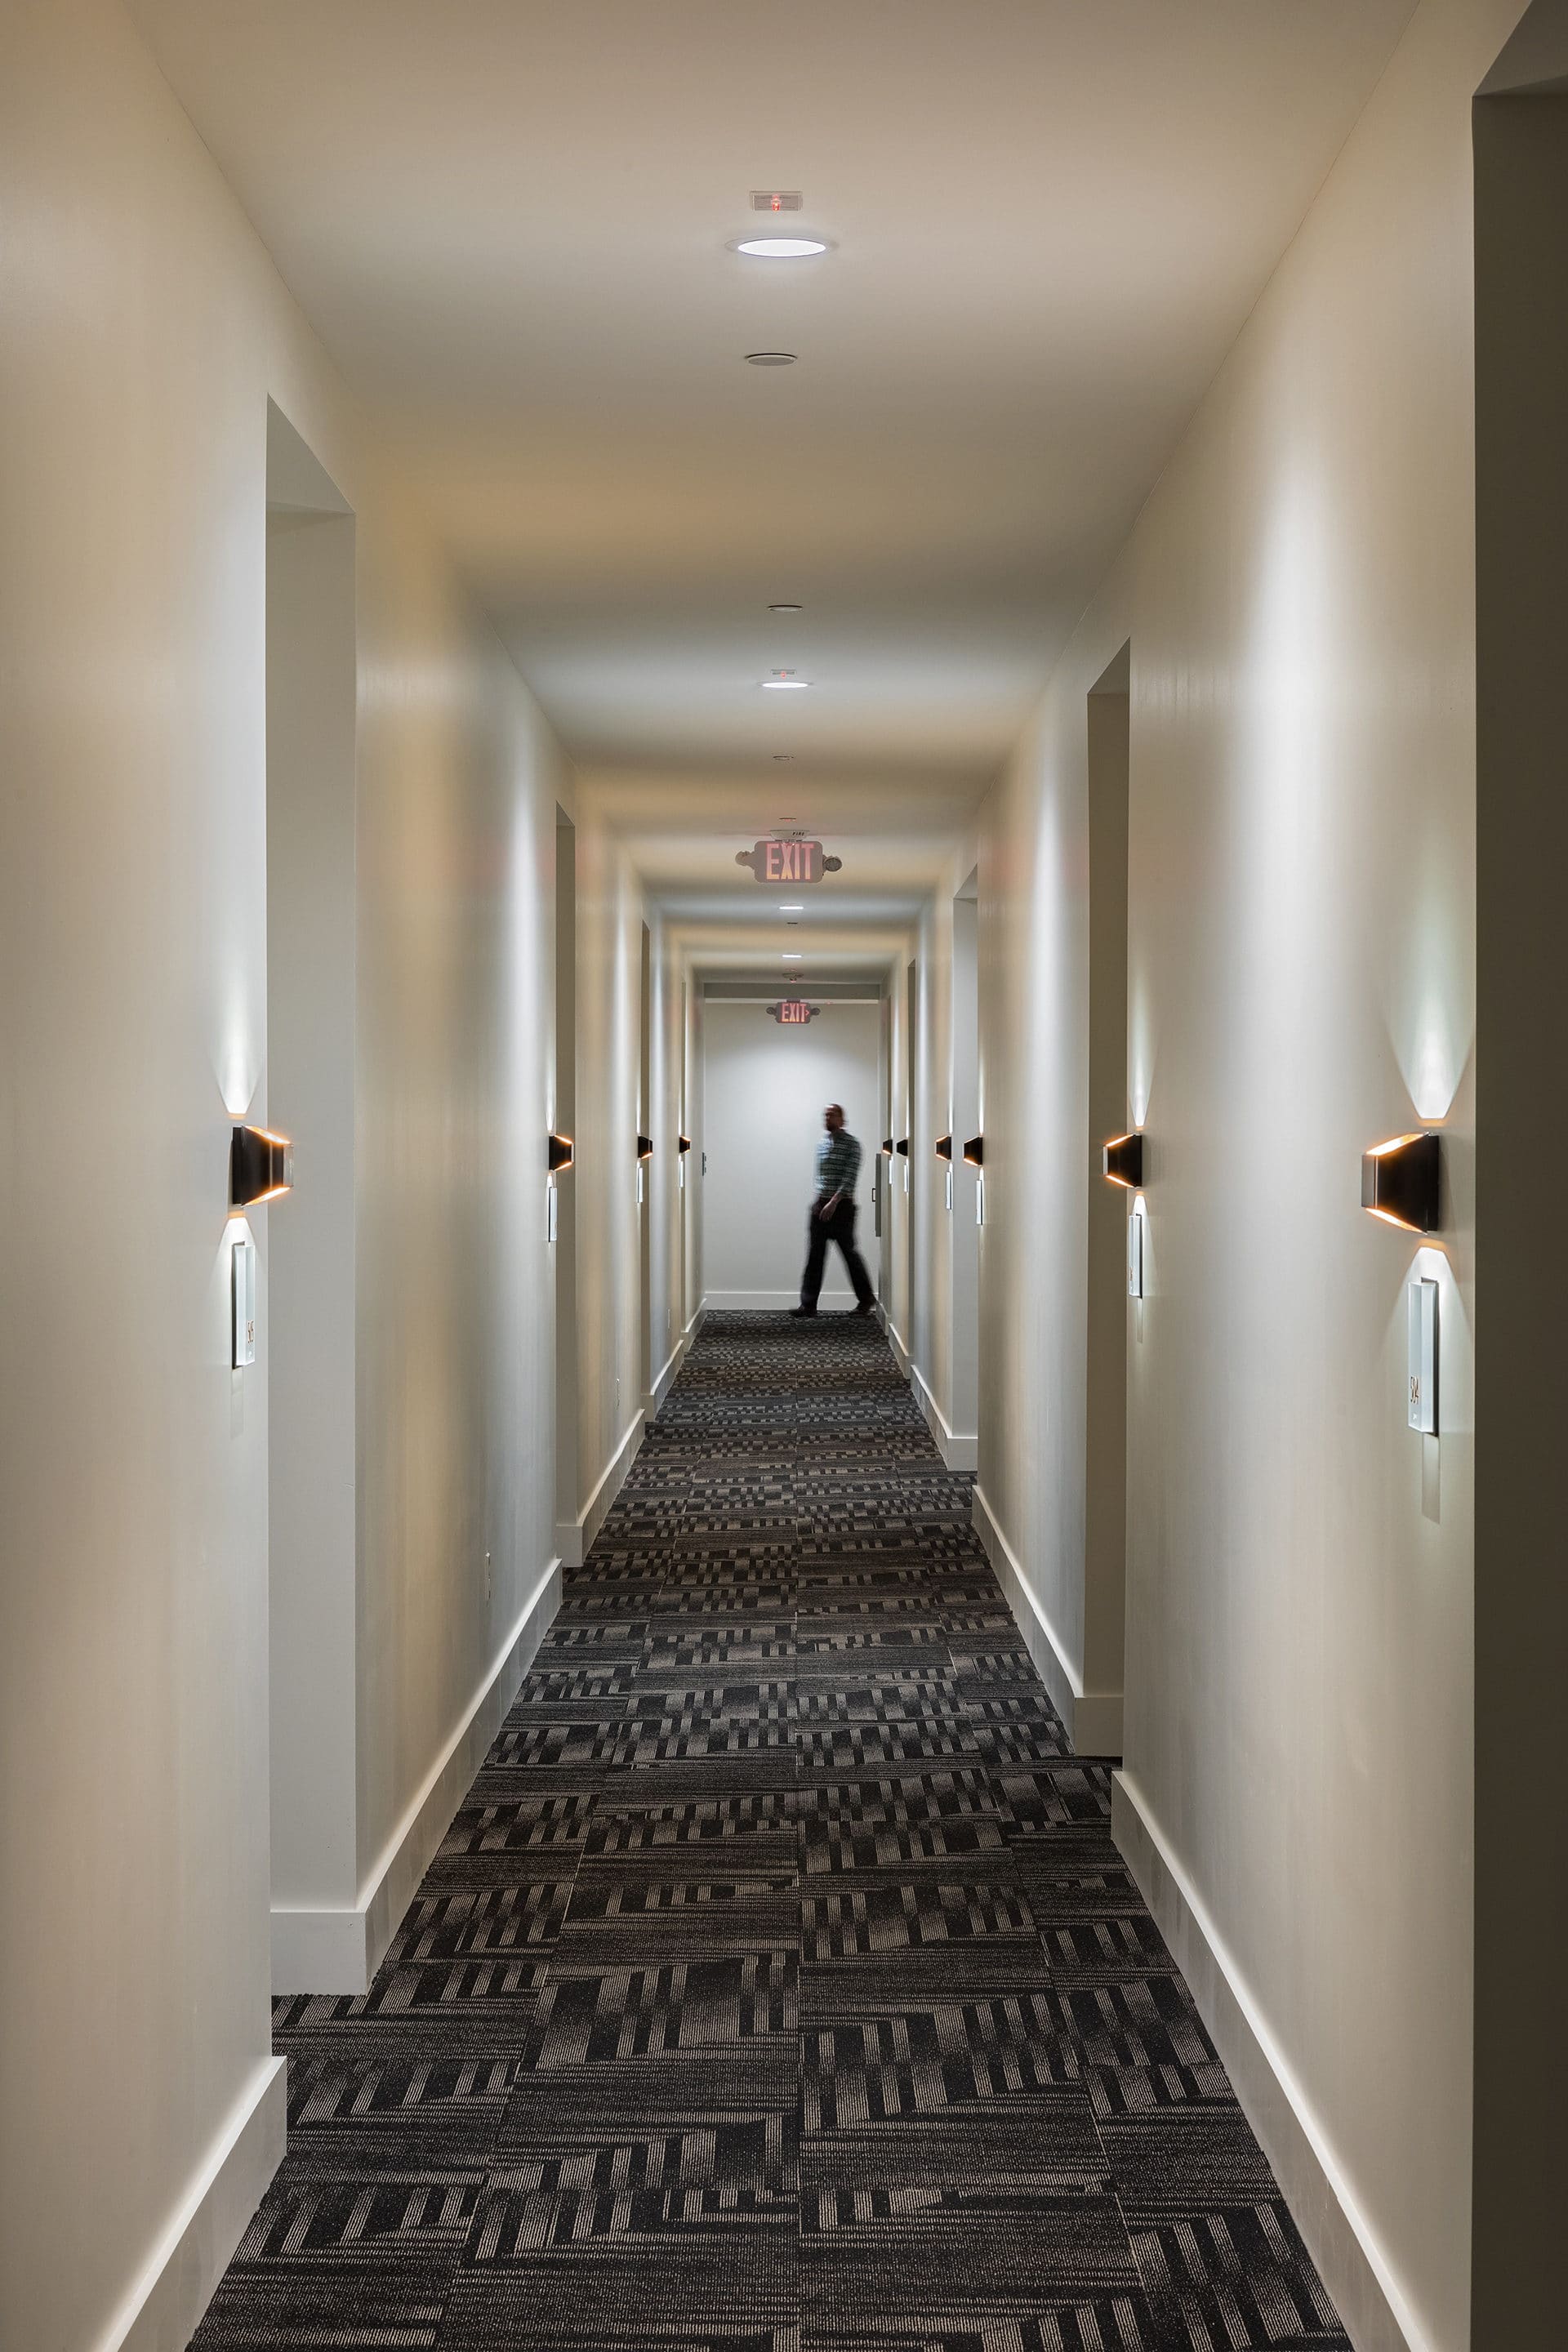 euclid building interior corridor designed by trivers architectural firm in st. louis